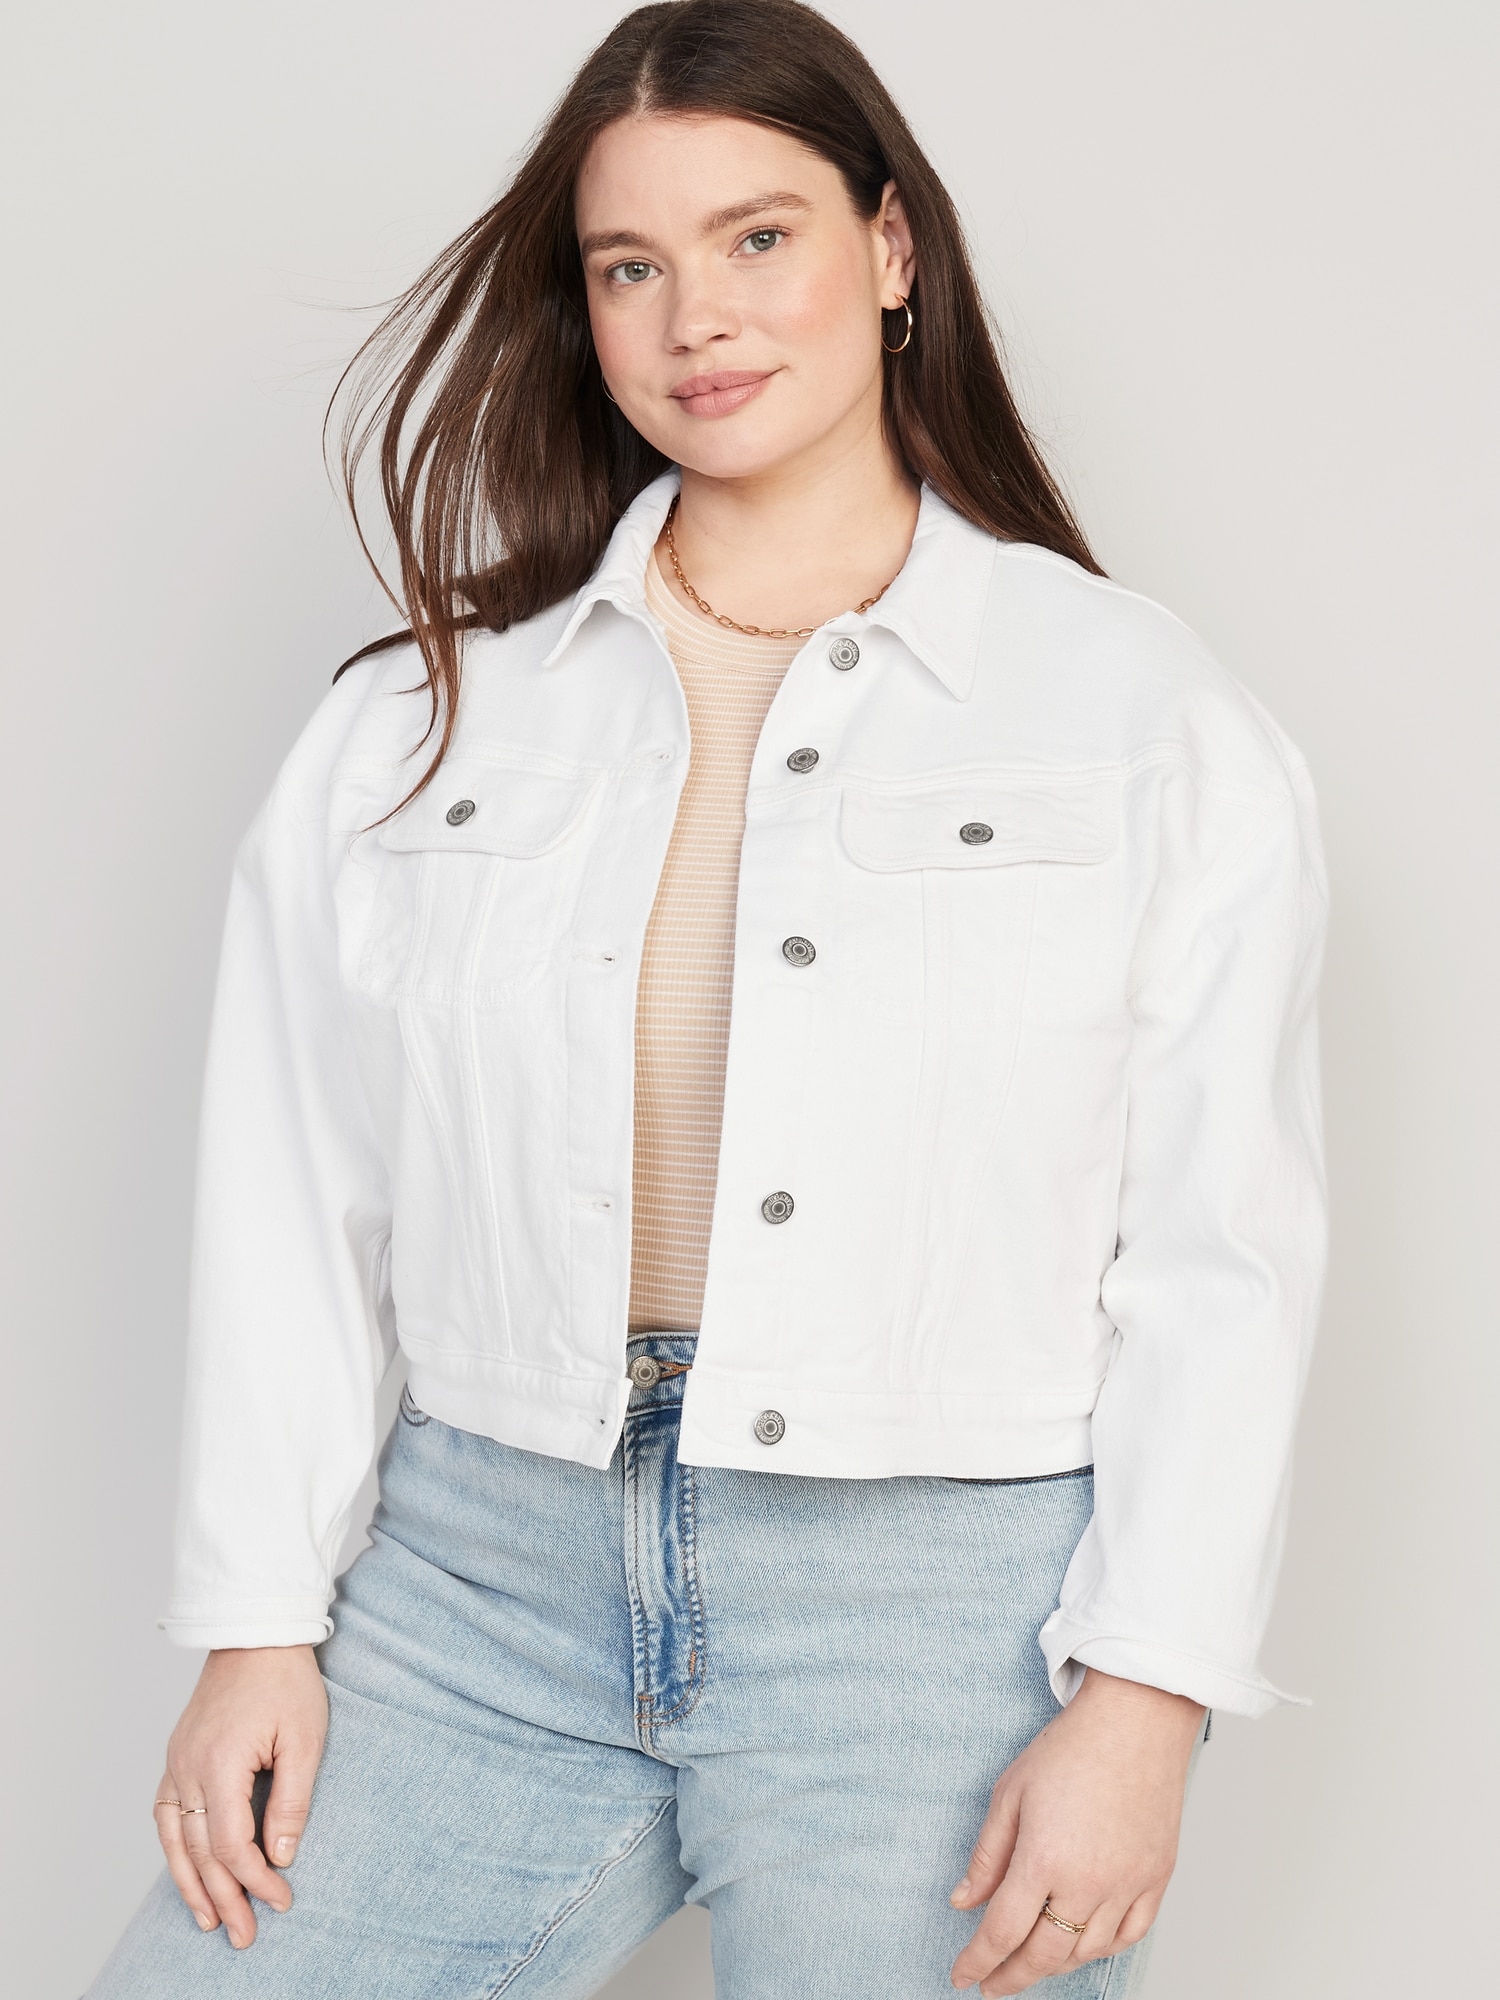 Cropped White-Wash Jean Jacket for Women | Old Navy